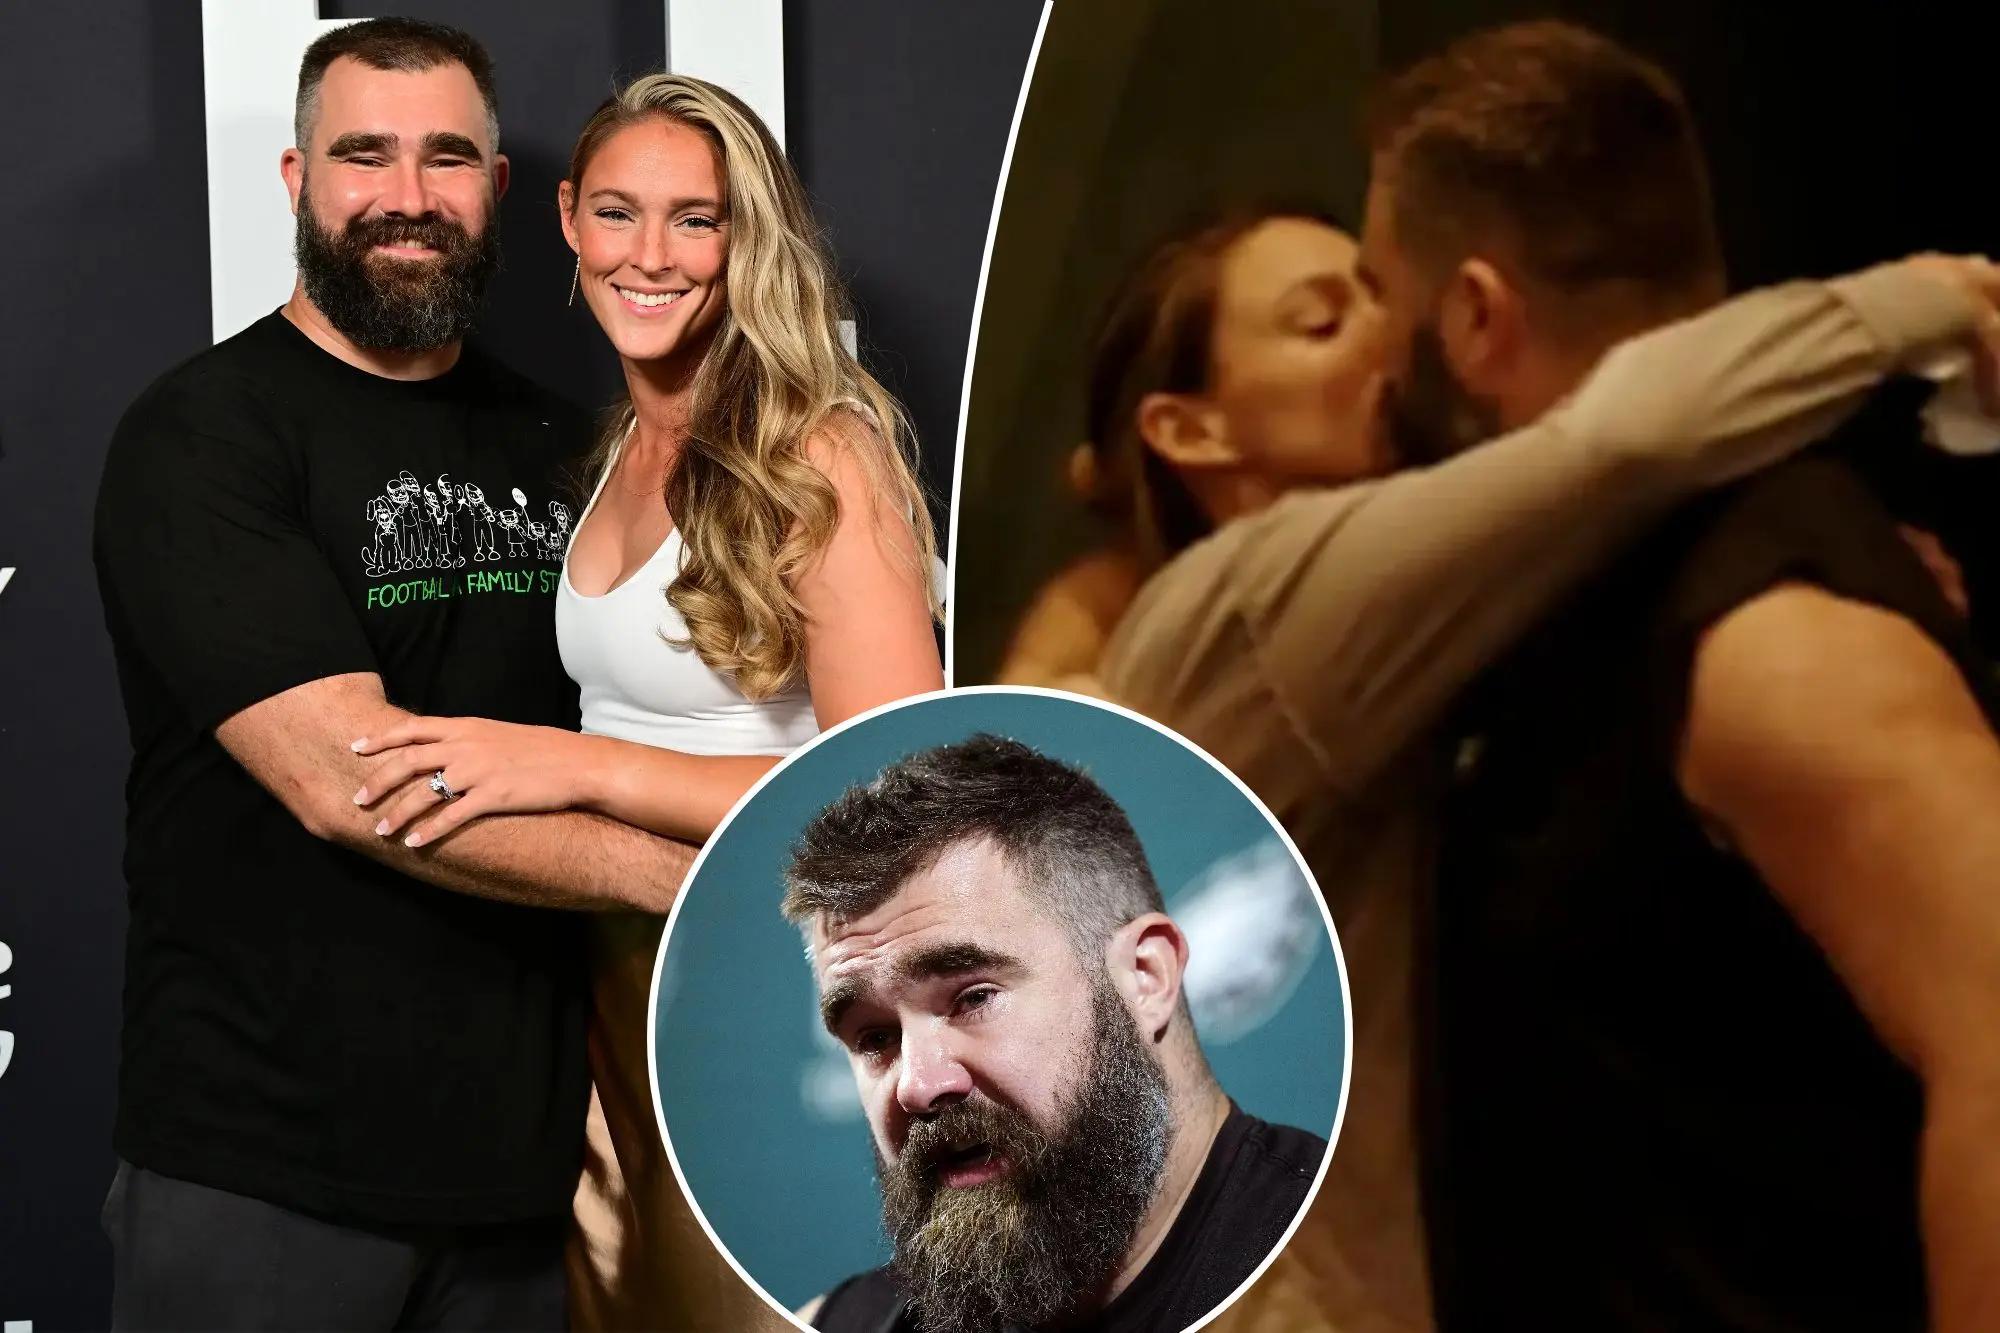 Jason Kelce's touching moment with wife Kylie in retirement press conference